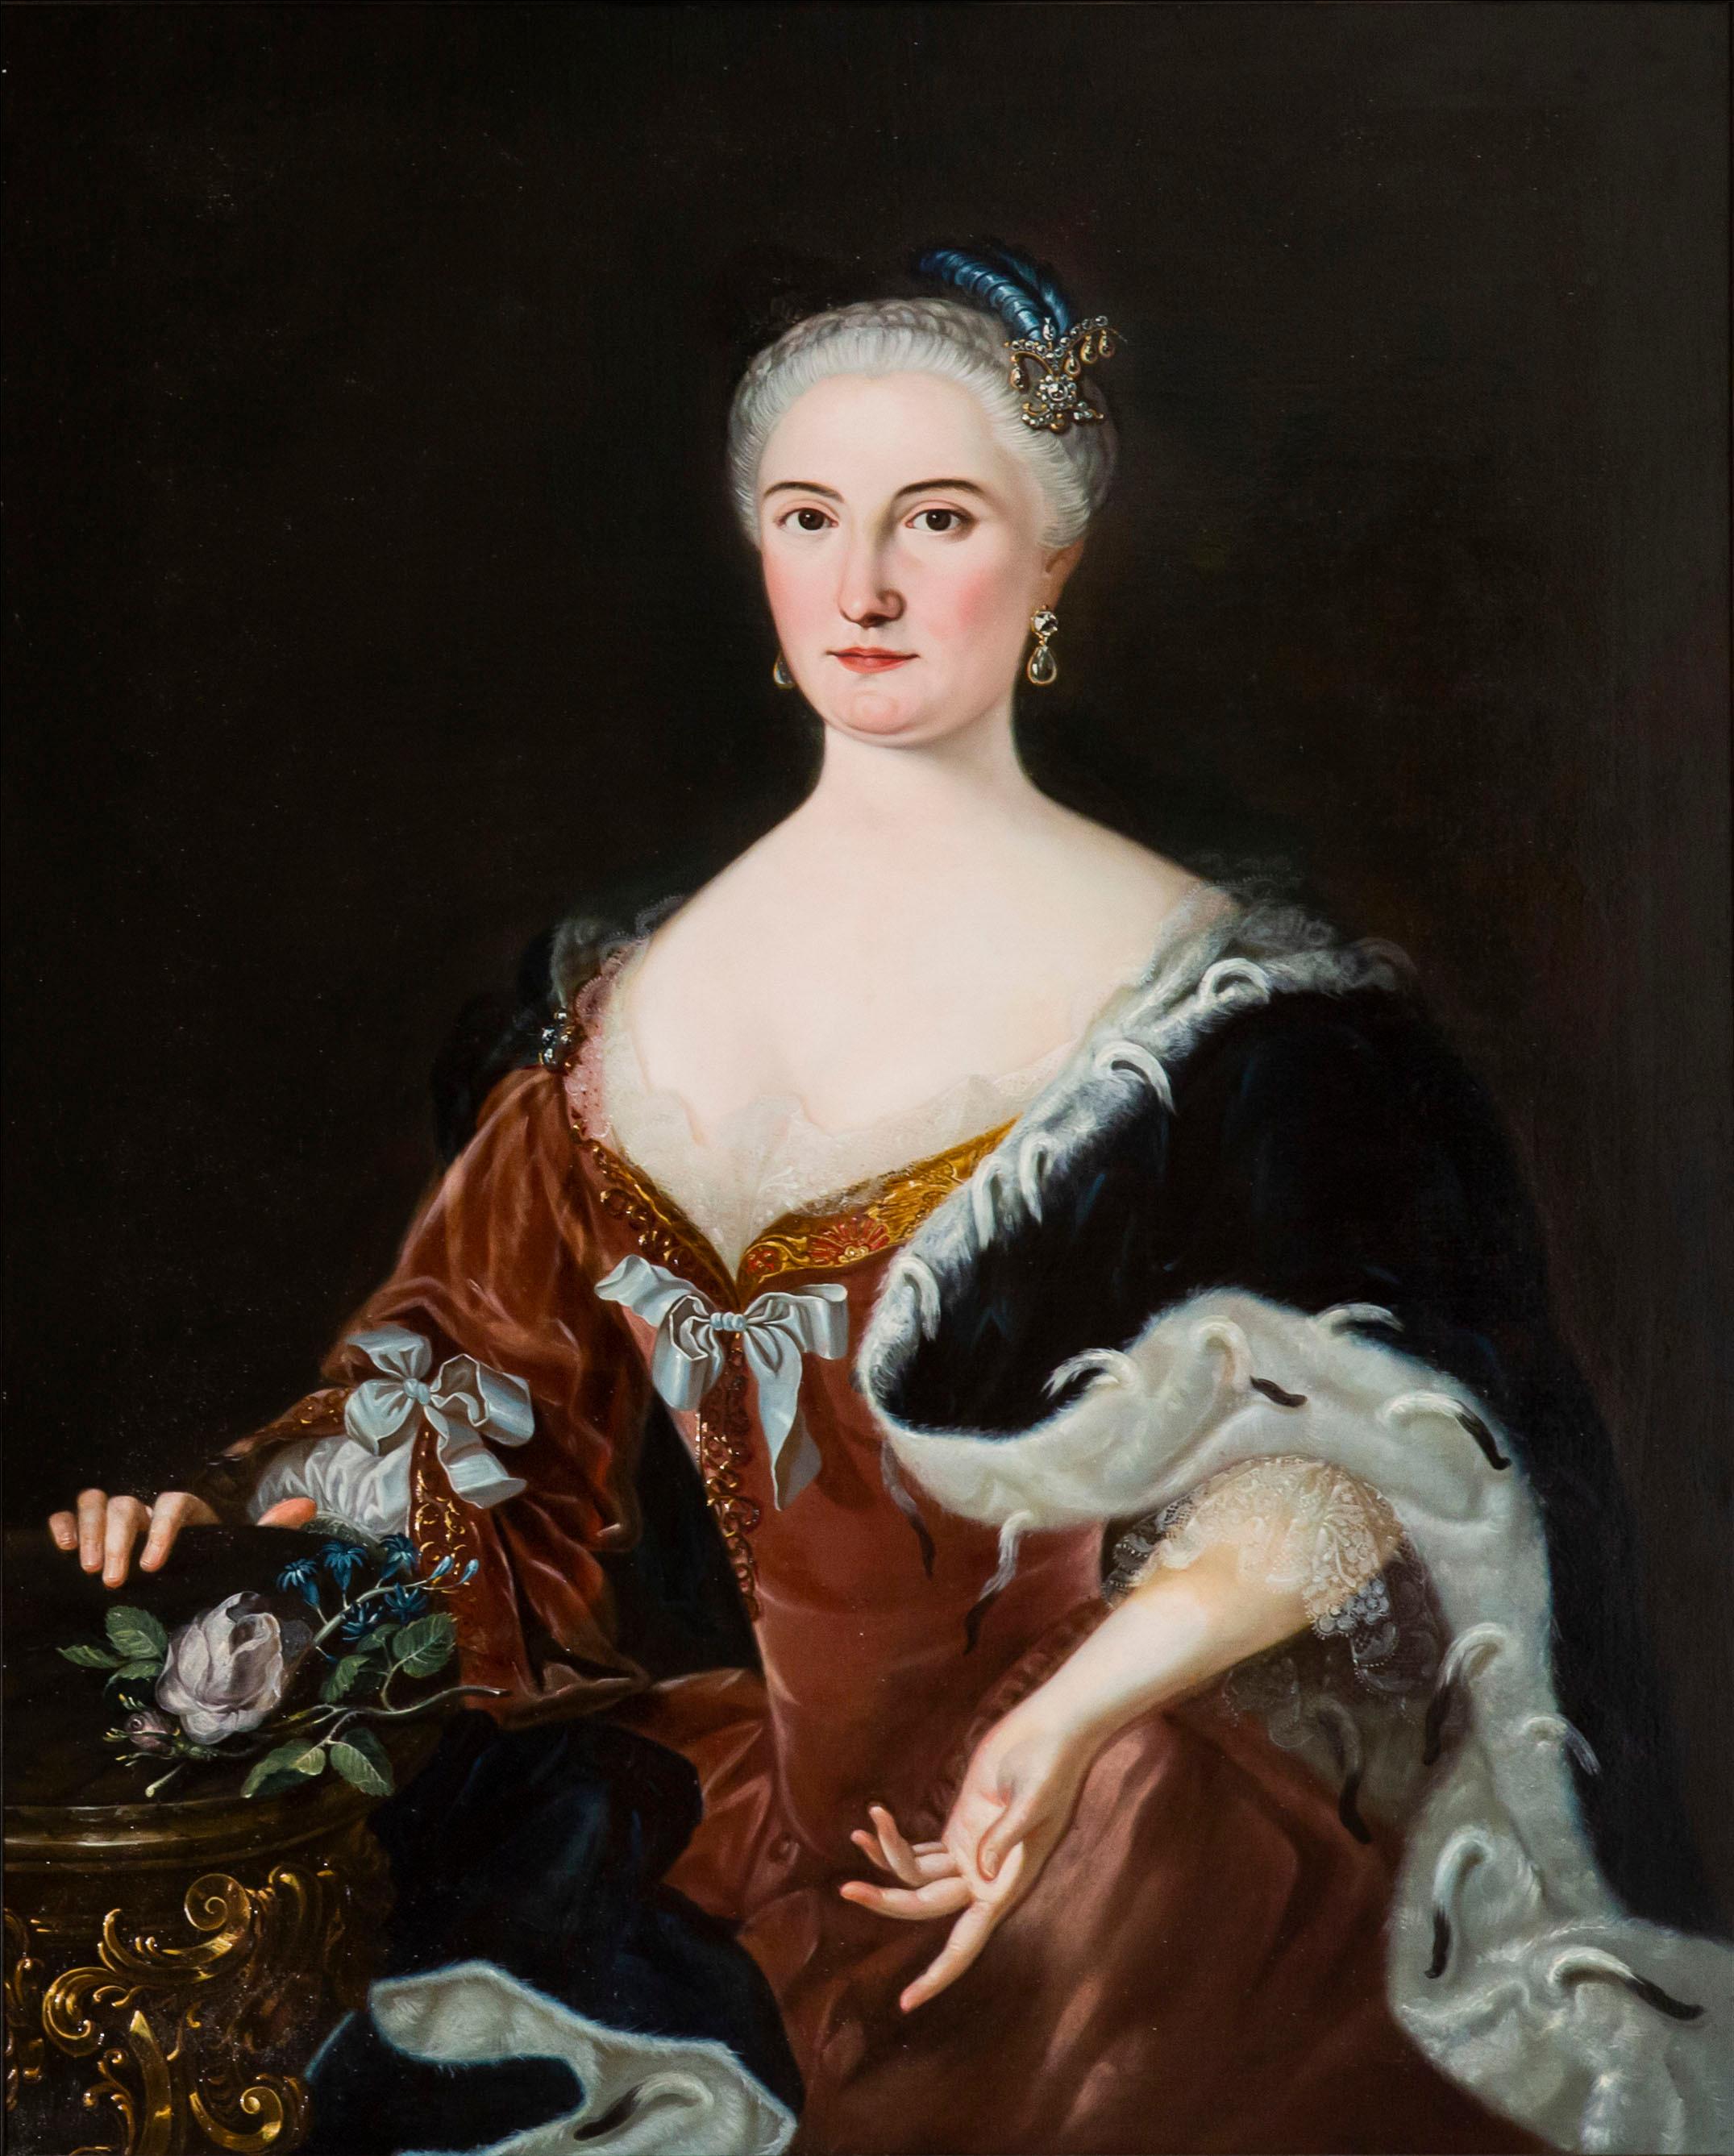 Hand-Painted 18th Century Oil Portrait of a Noble Lady in Red